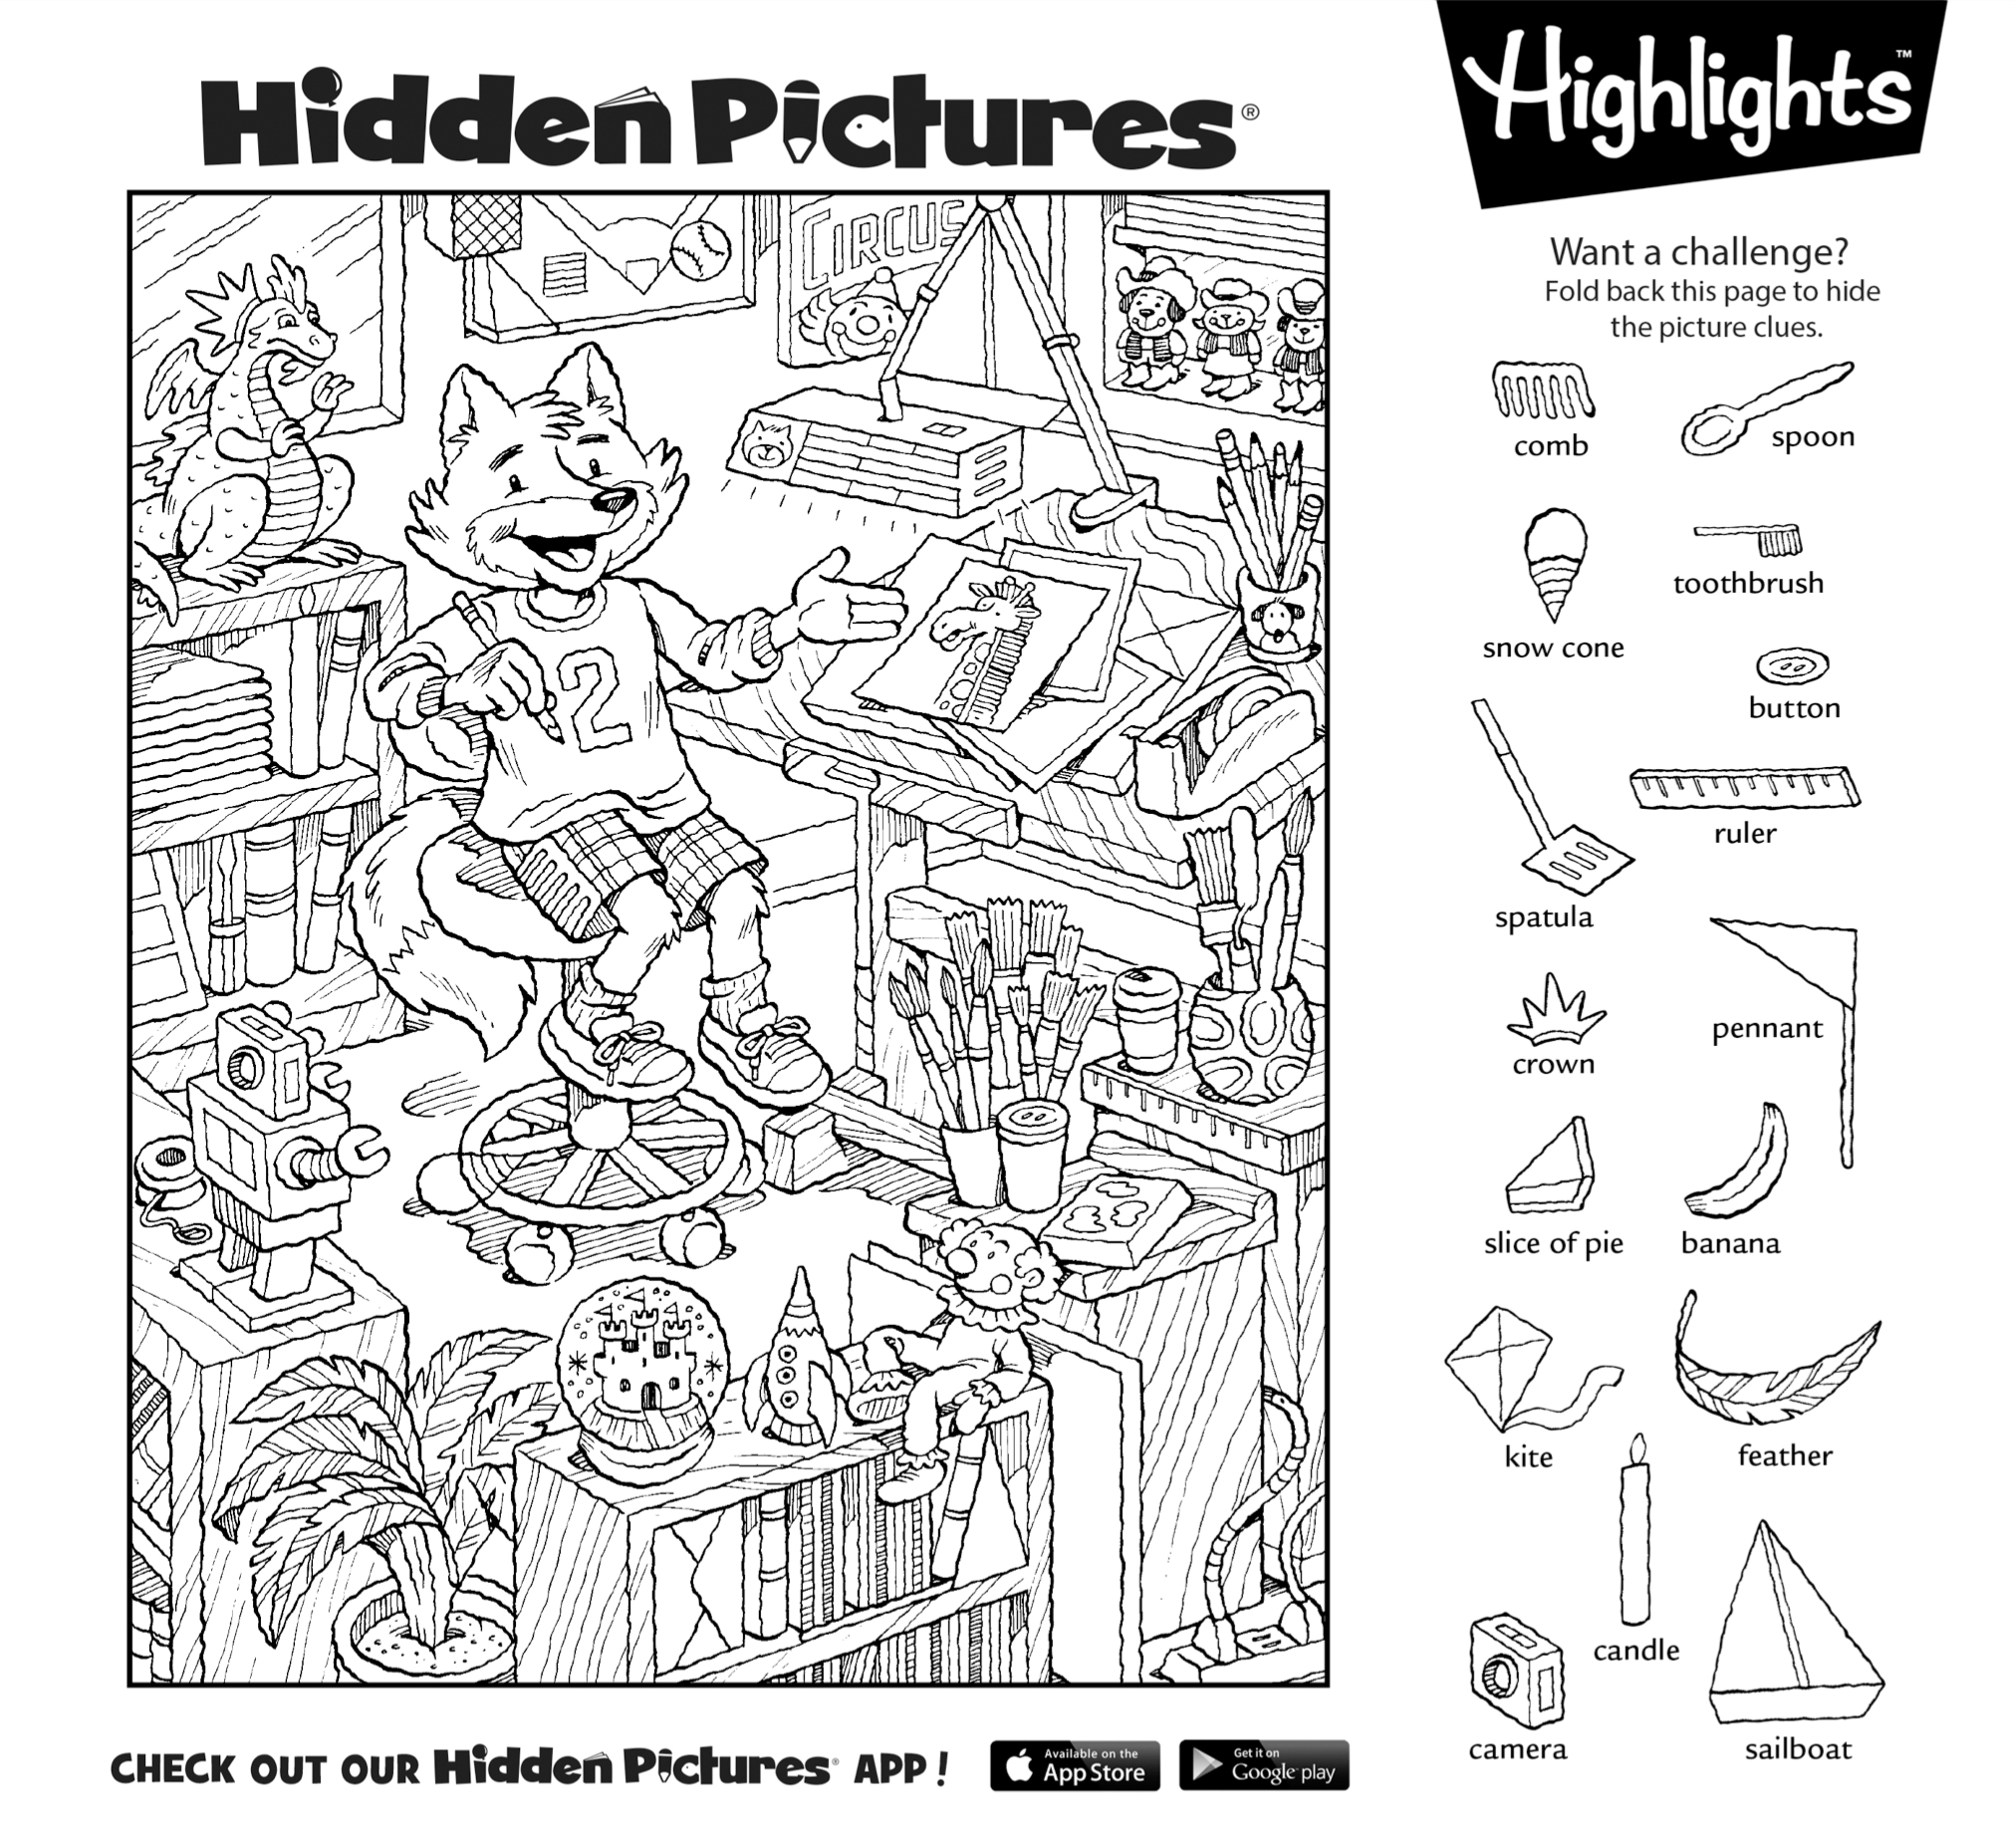 Download This Free Printable Hidden Pictures Puzzle To Share With - Printable Hidden Puzzle Games